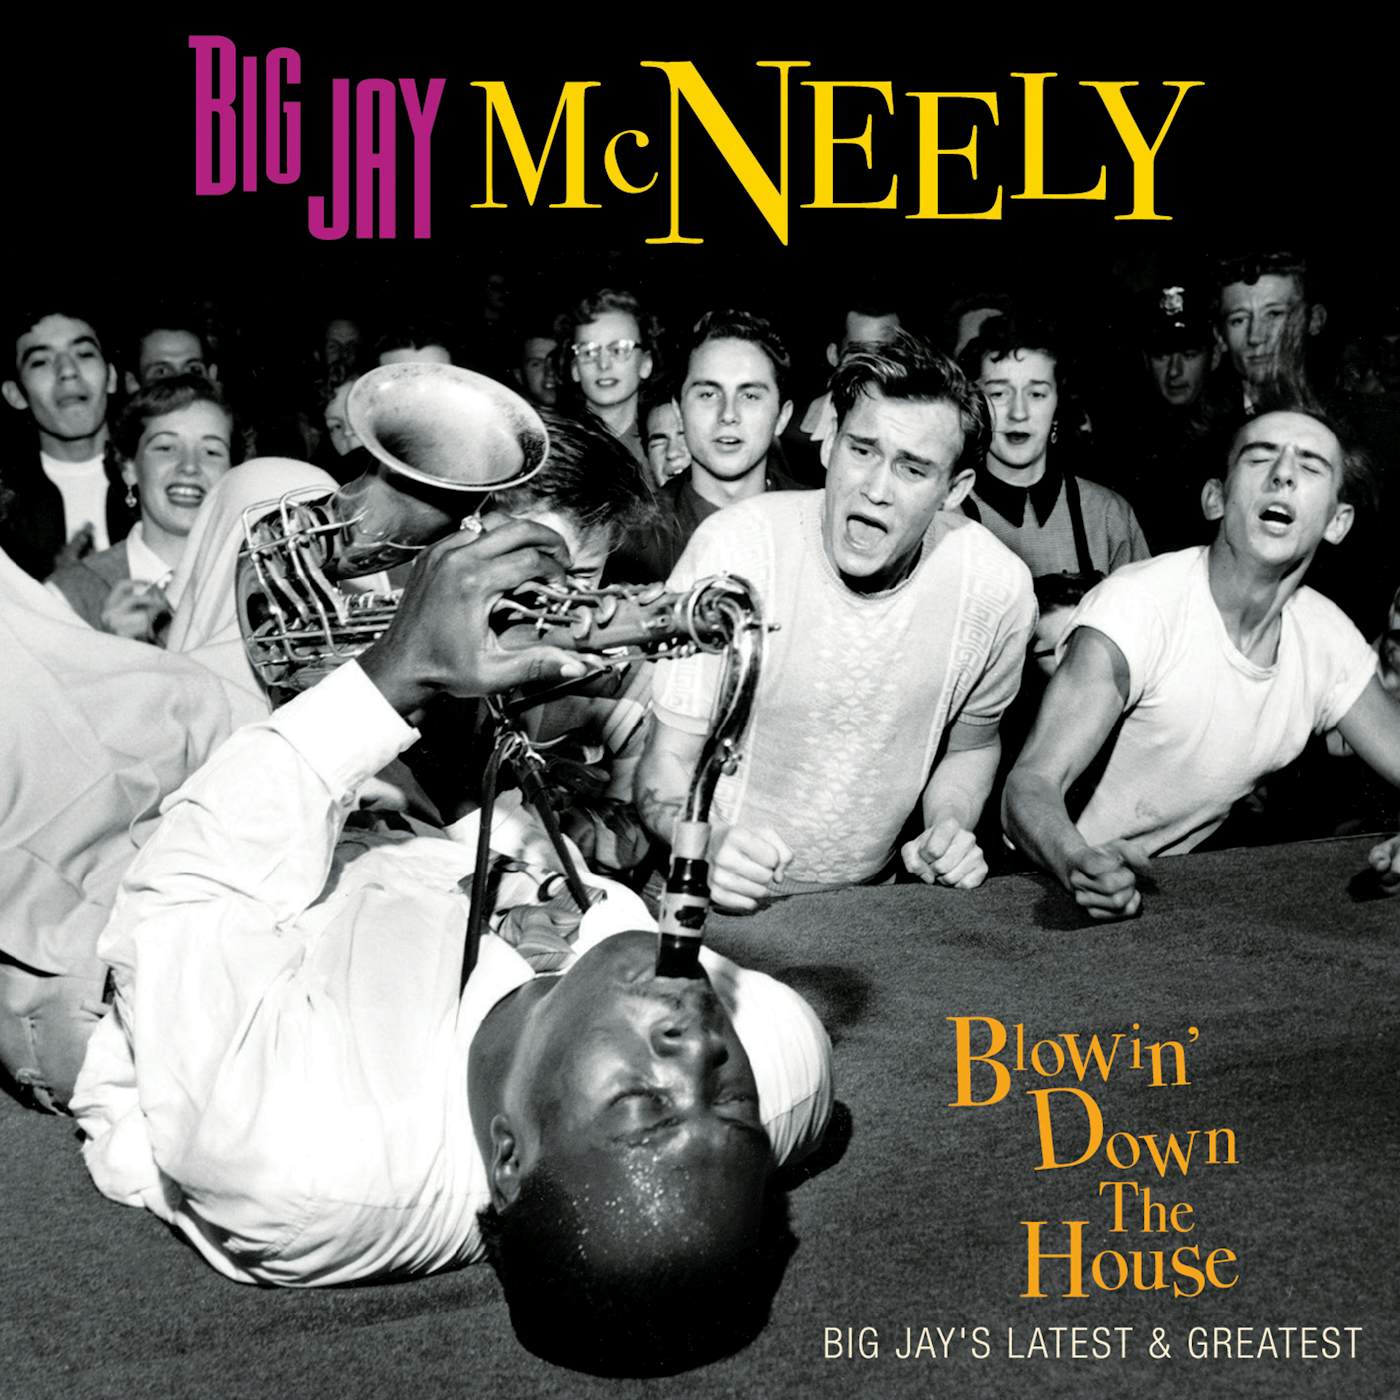 Big Jay McNeely BLOWIN' DOWN THE HOUSE-BIG JAY'S LATEST & GREATEST CD